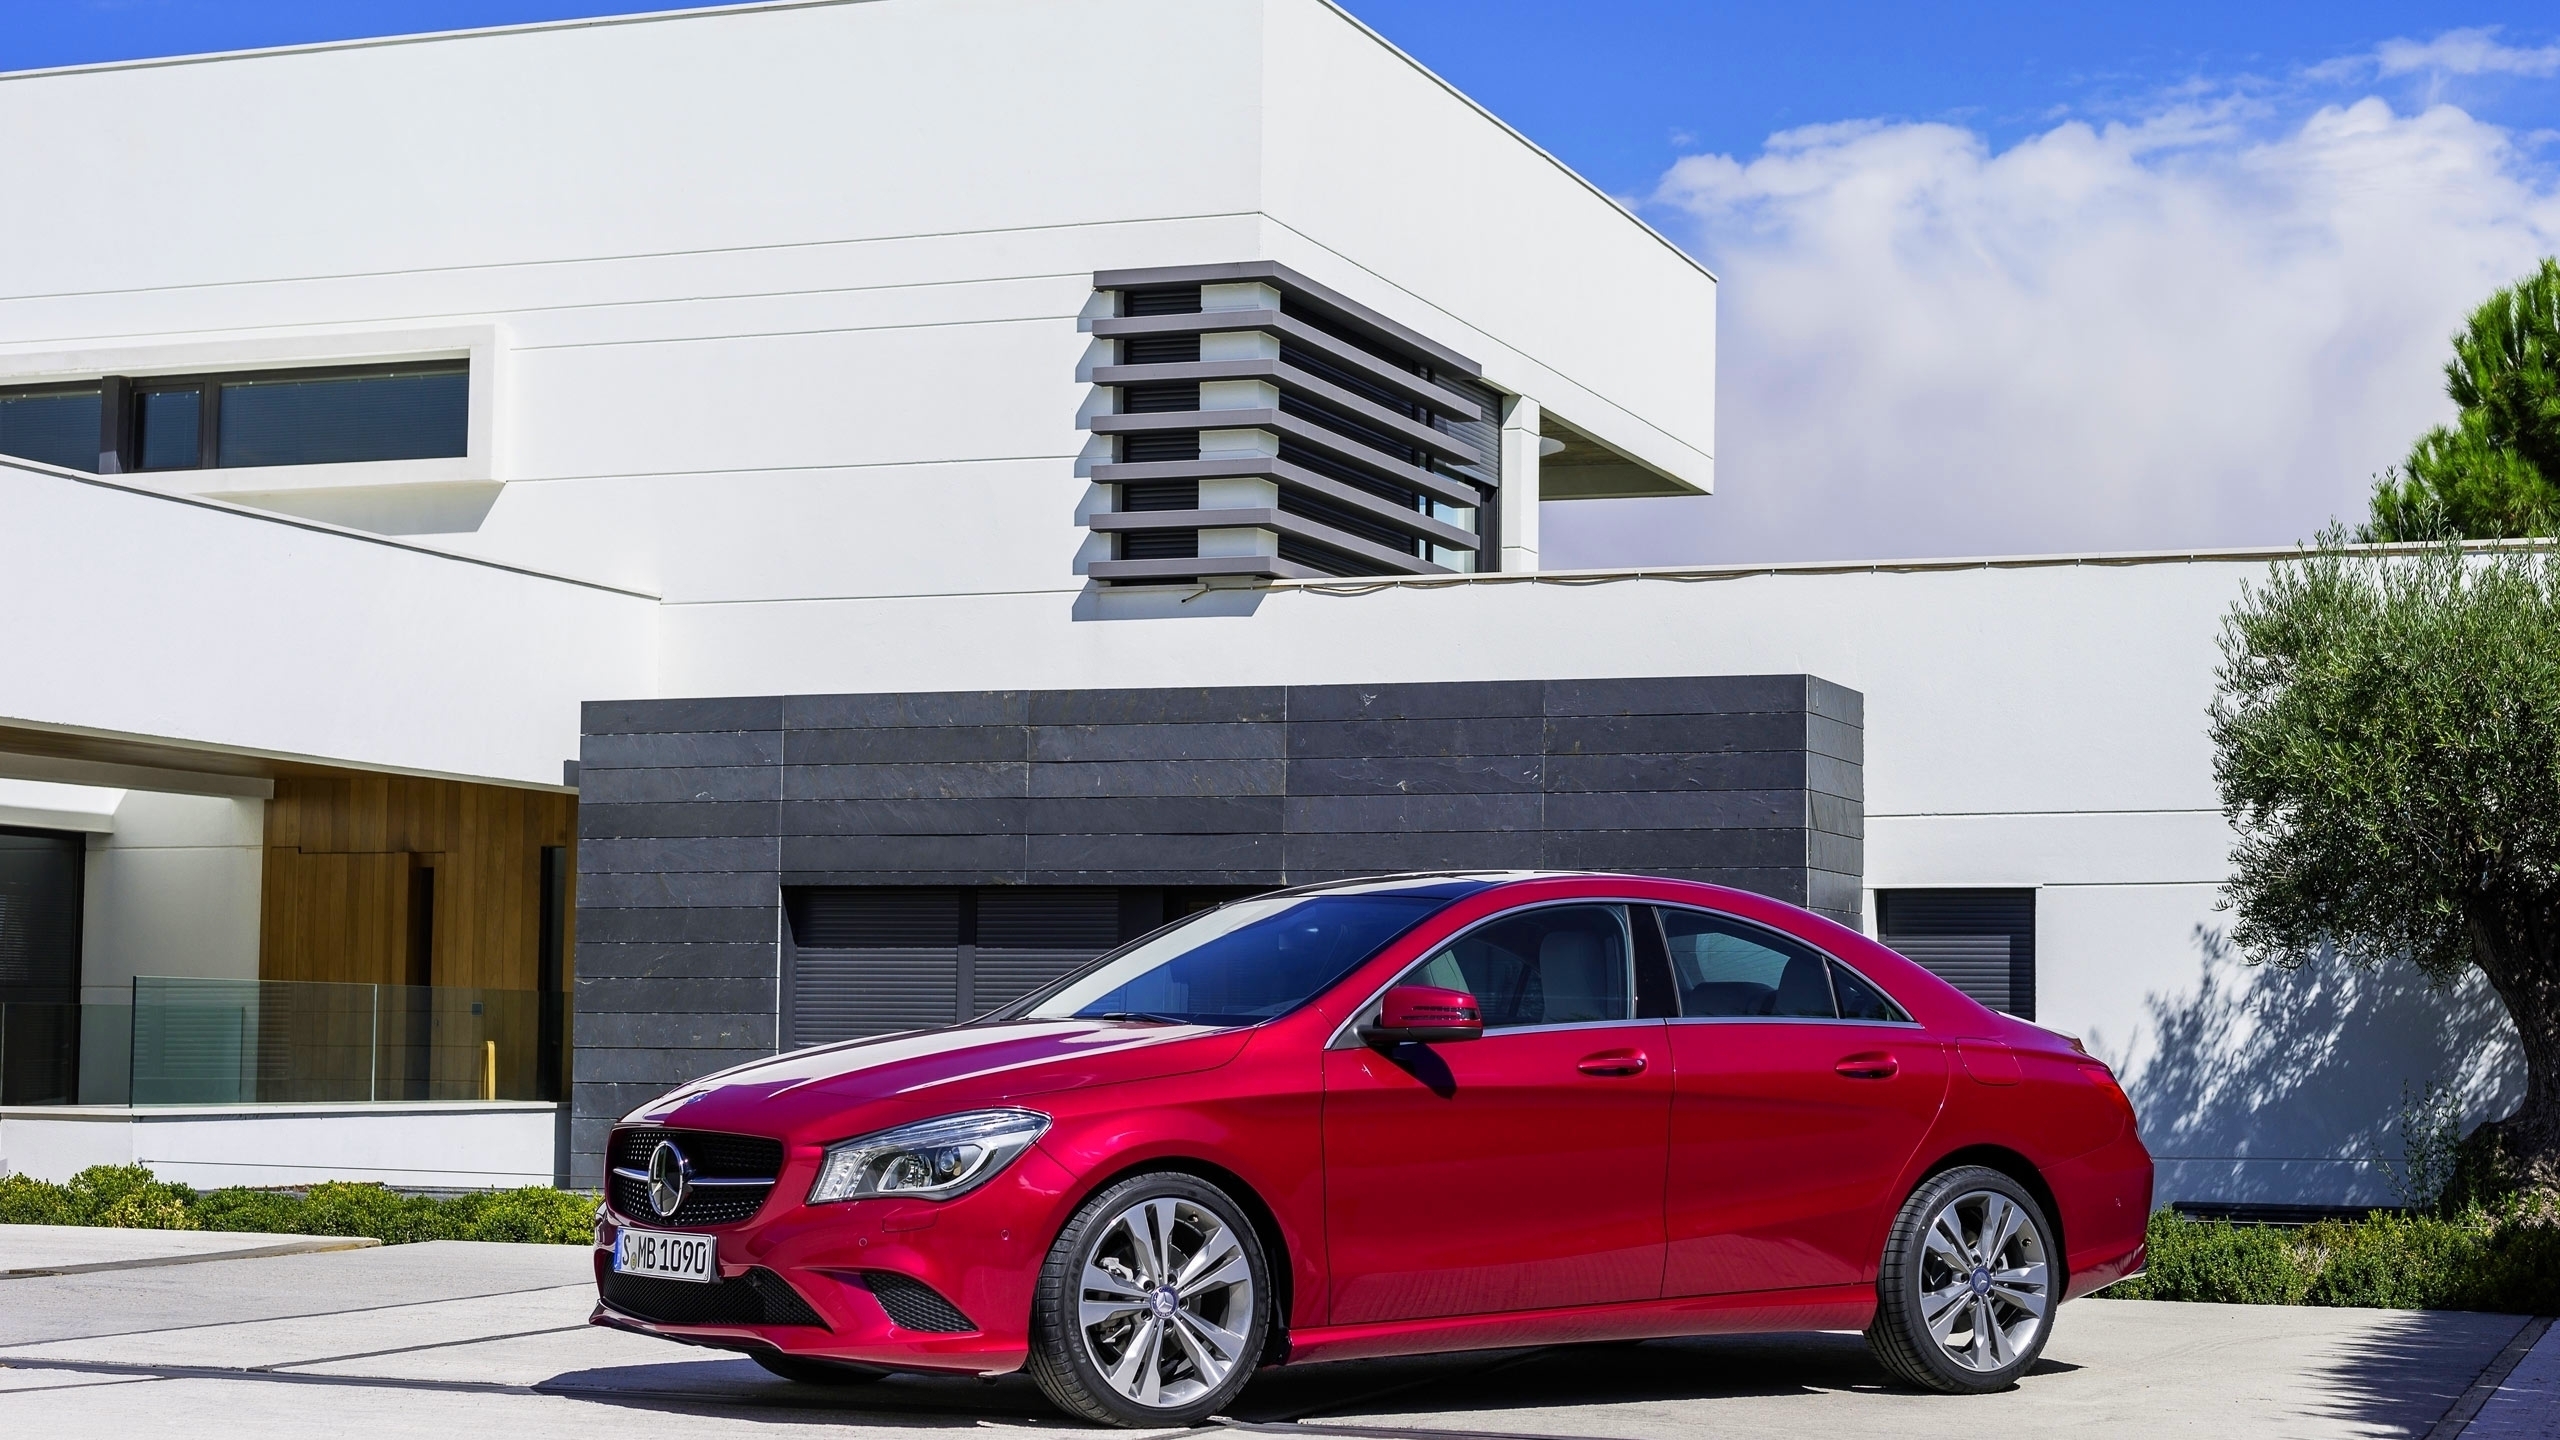 Gourgeous CLA Mercedes  for 2560x1440 HDTV resolution